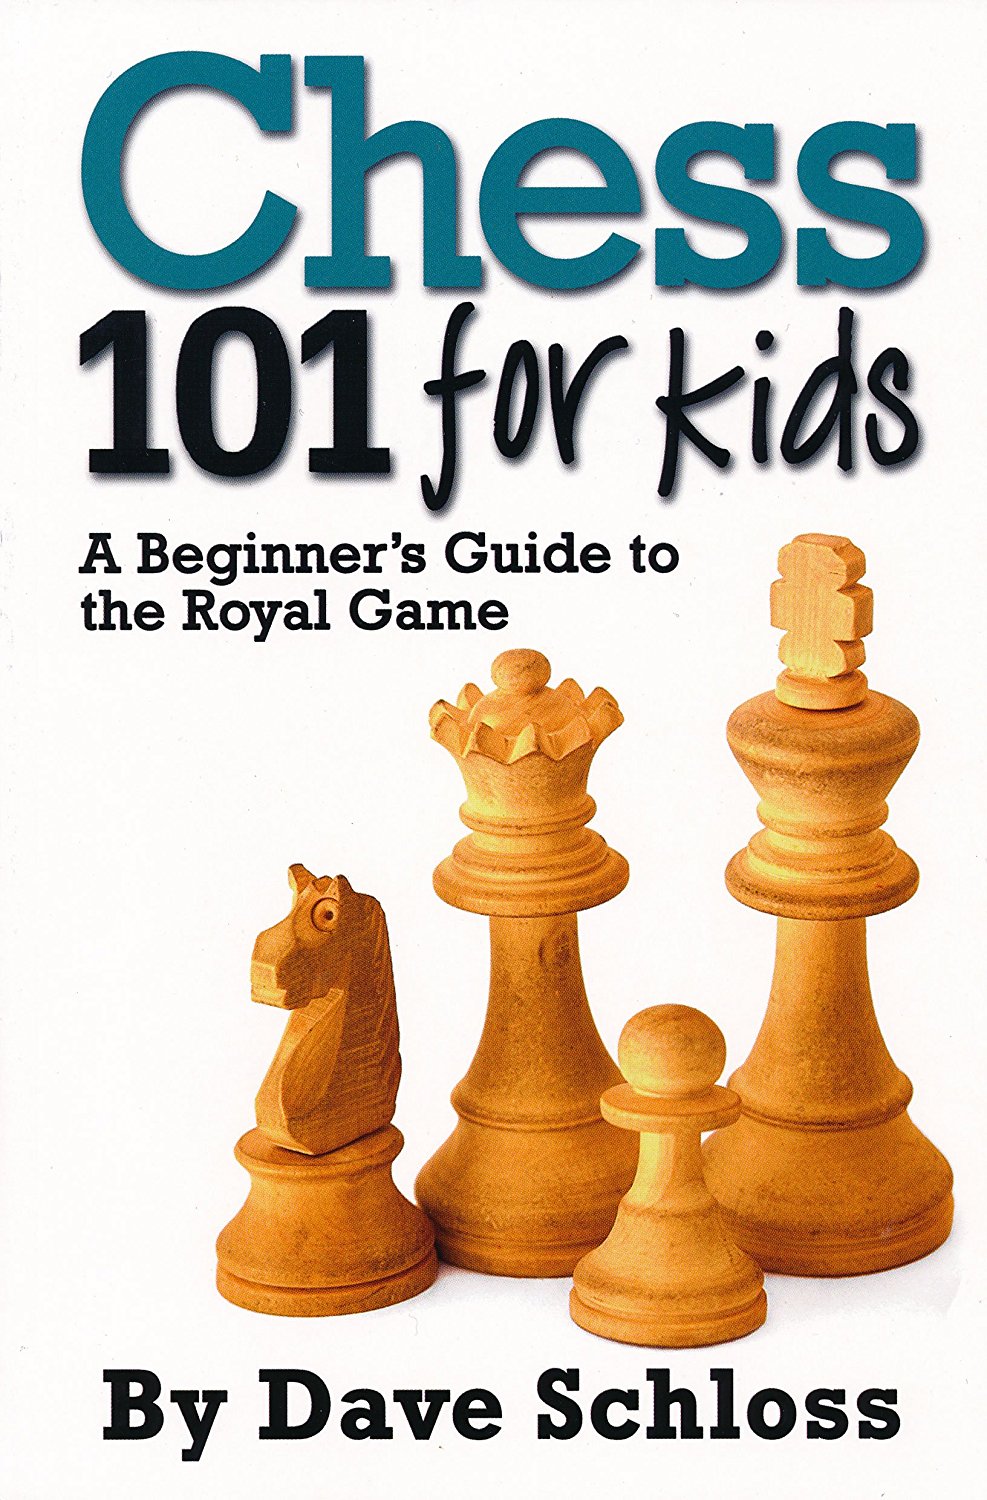 A Kid's Guide to Playing Chess